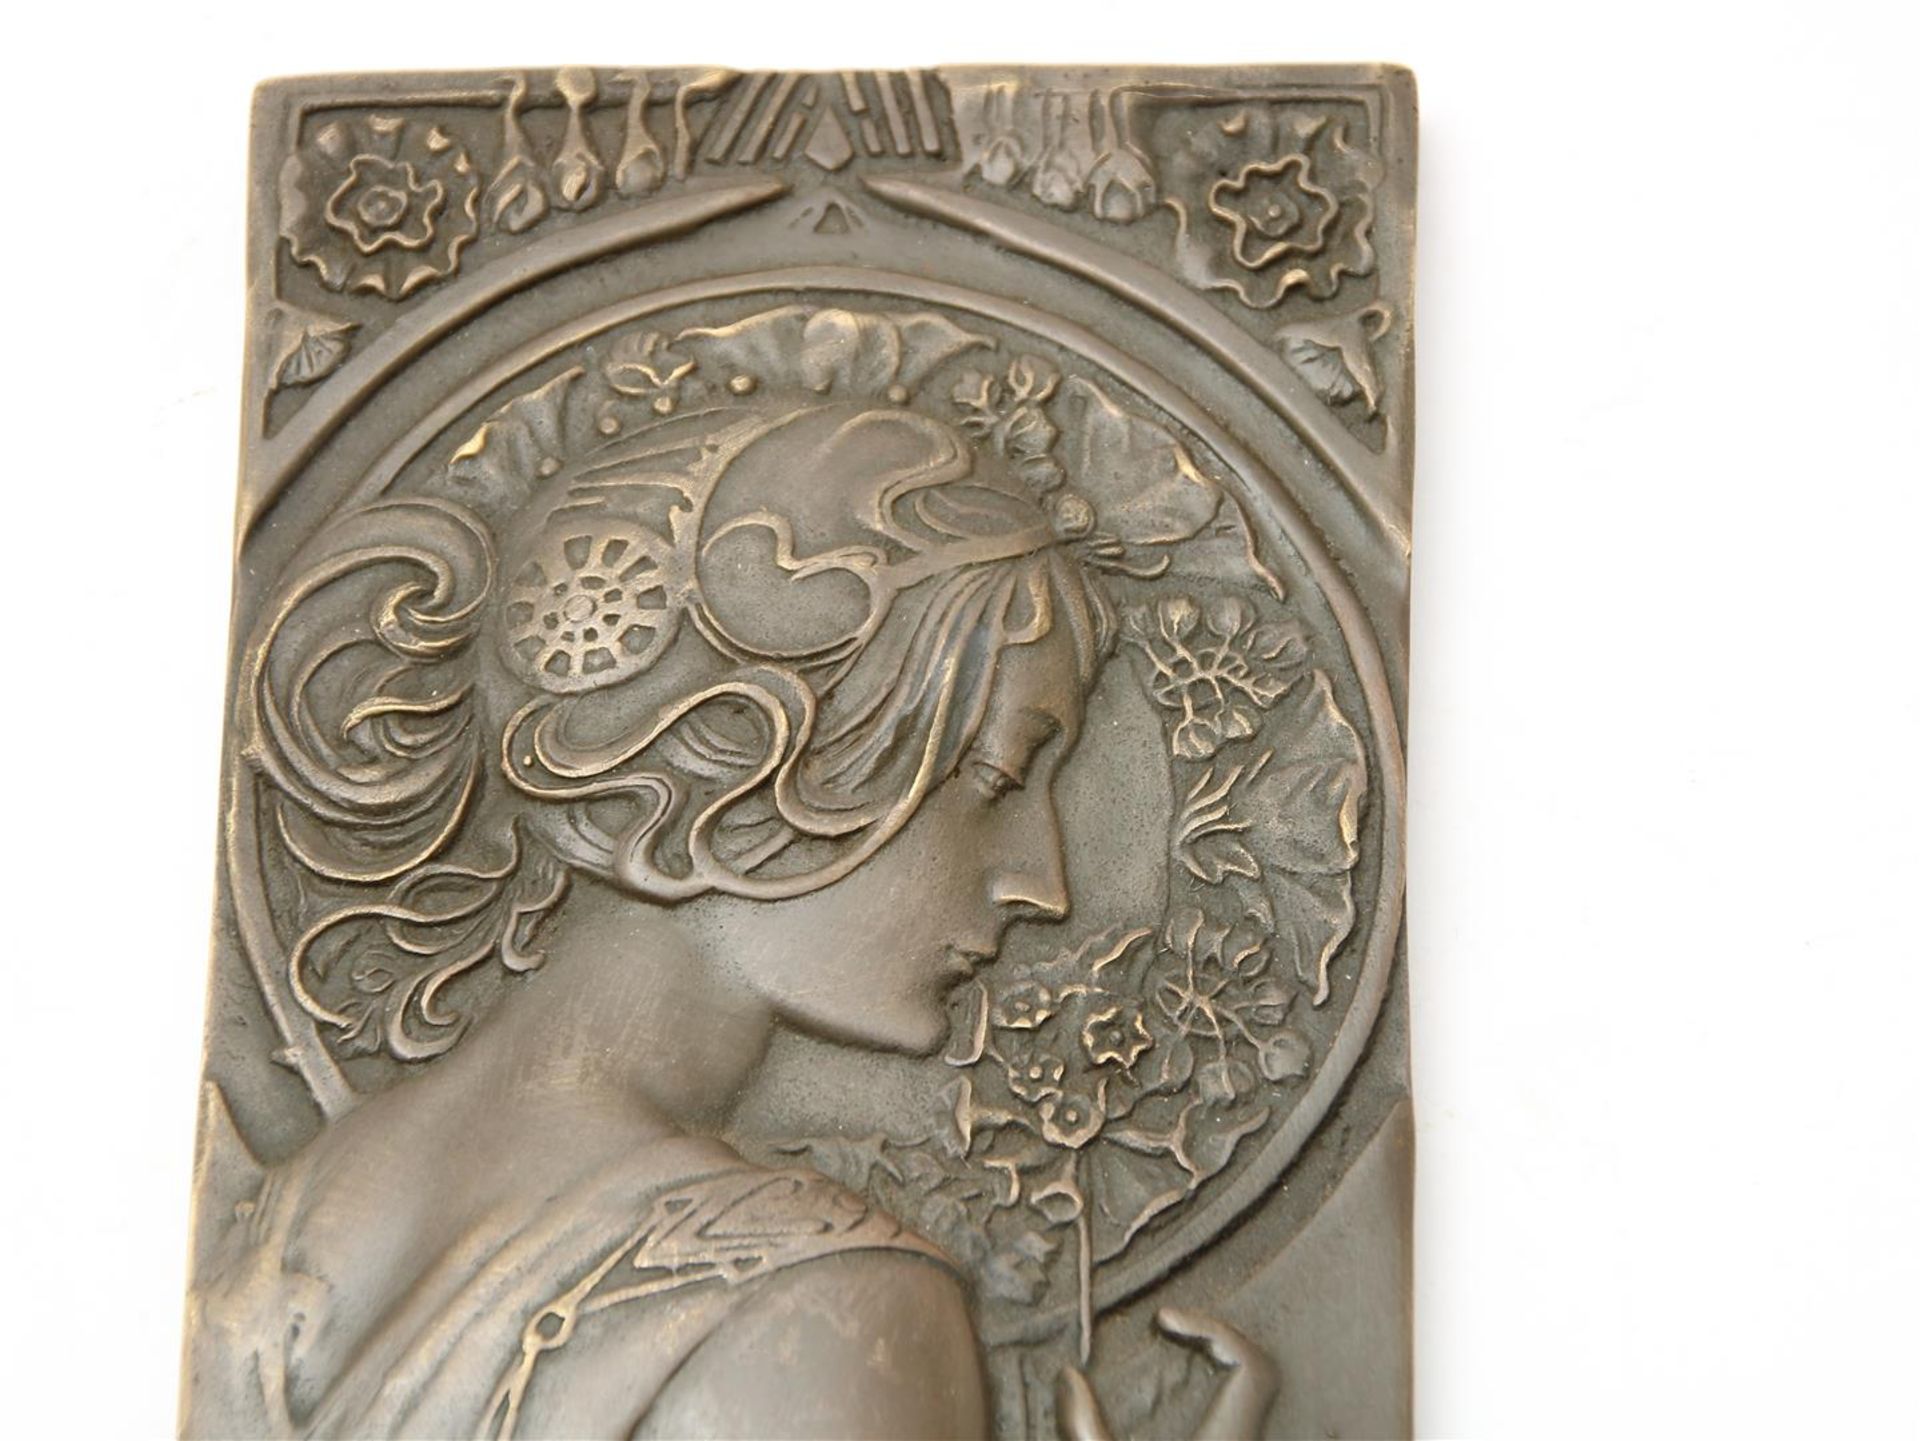 Set of bronze Art Nouveau-style plaques with relief decor of female figures, after Mucha, 23 x 9 - Image 2 of 5